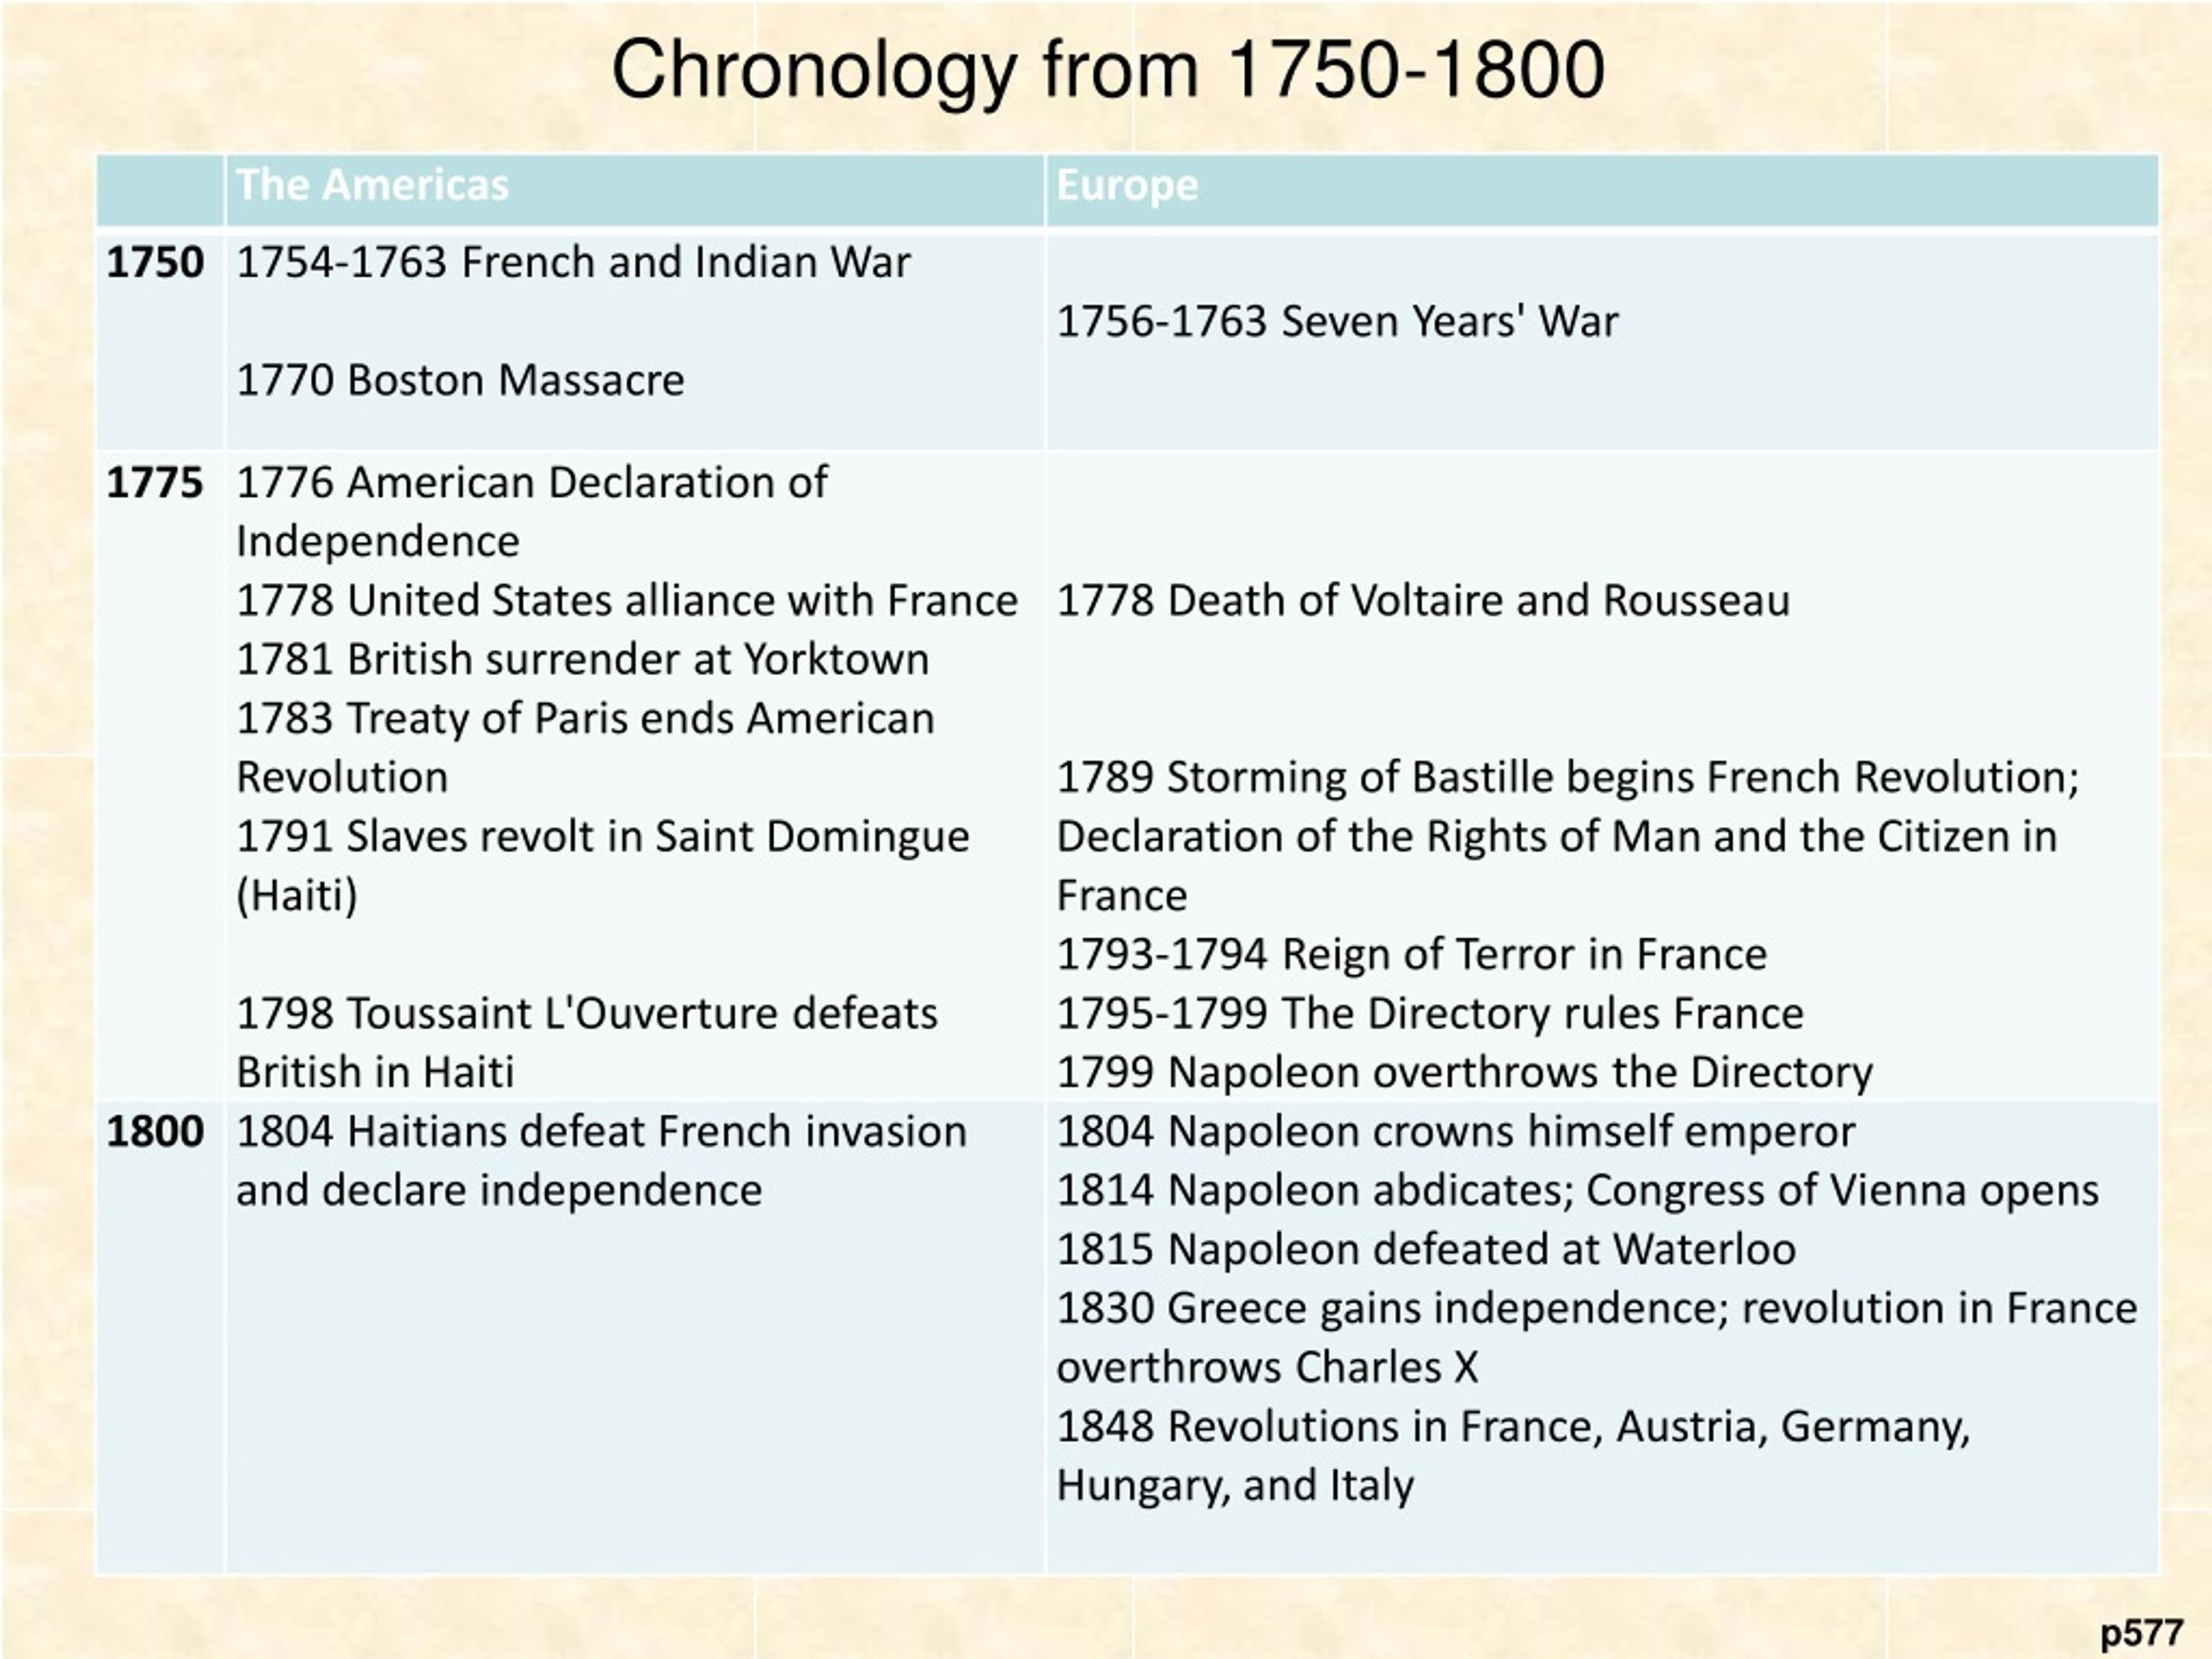 PPT - Chapter 22 Revolutionary Changes in the Atlantic World, 1750-1850 ...